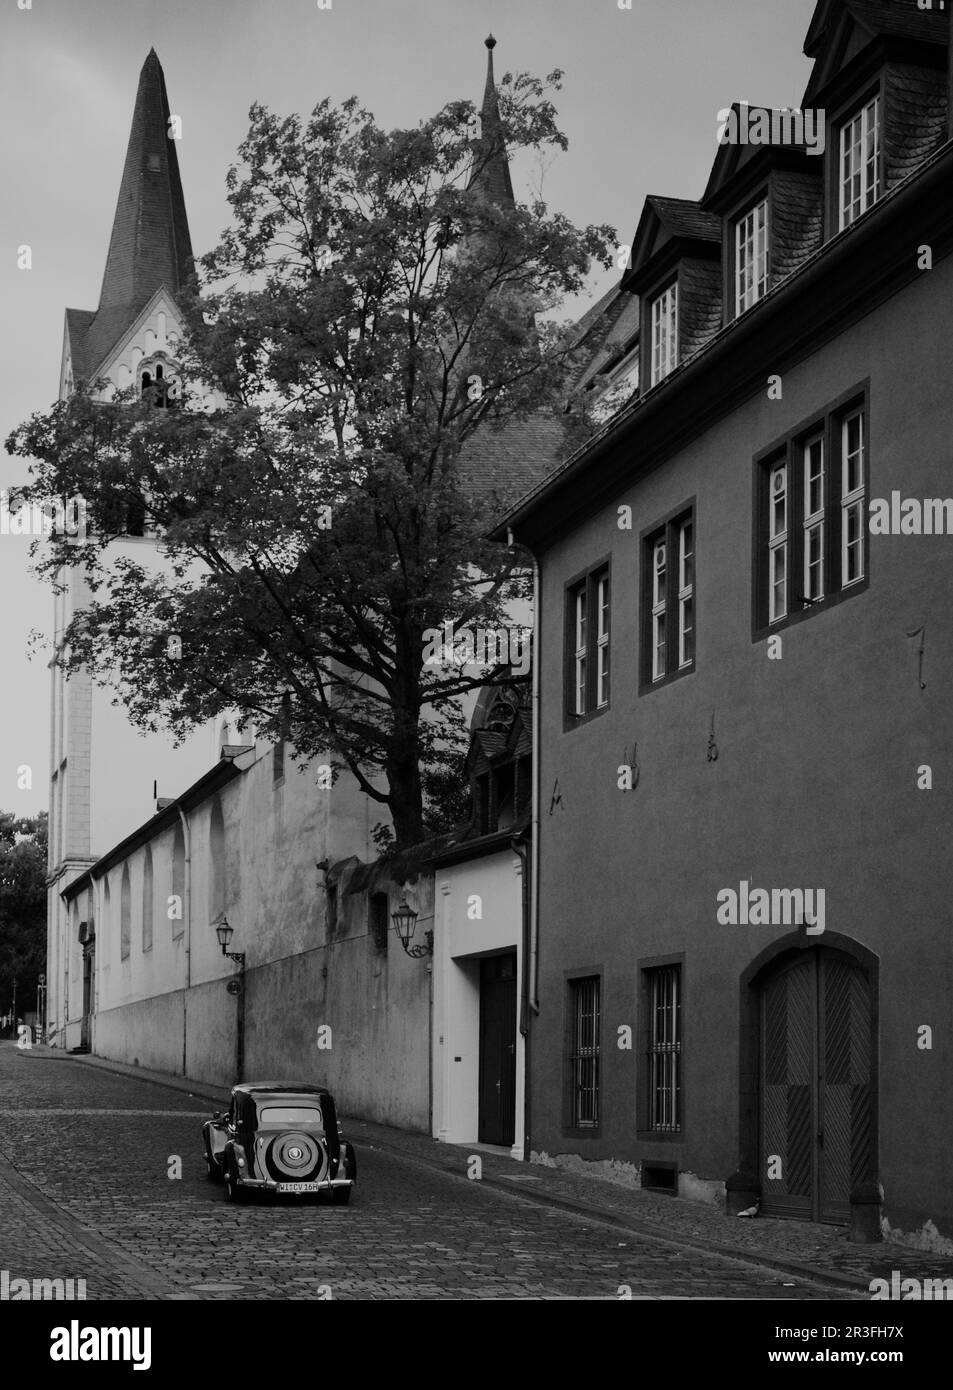 Black and White photo of the streets of Koblenz, Germany with no people and one solitary early 1900's vintage automobile, gives feeling of bygone era. Stock Photo